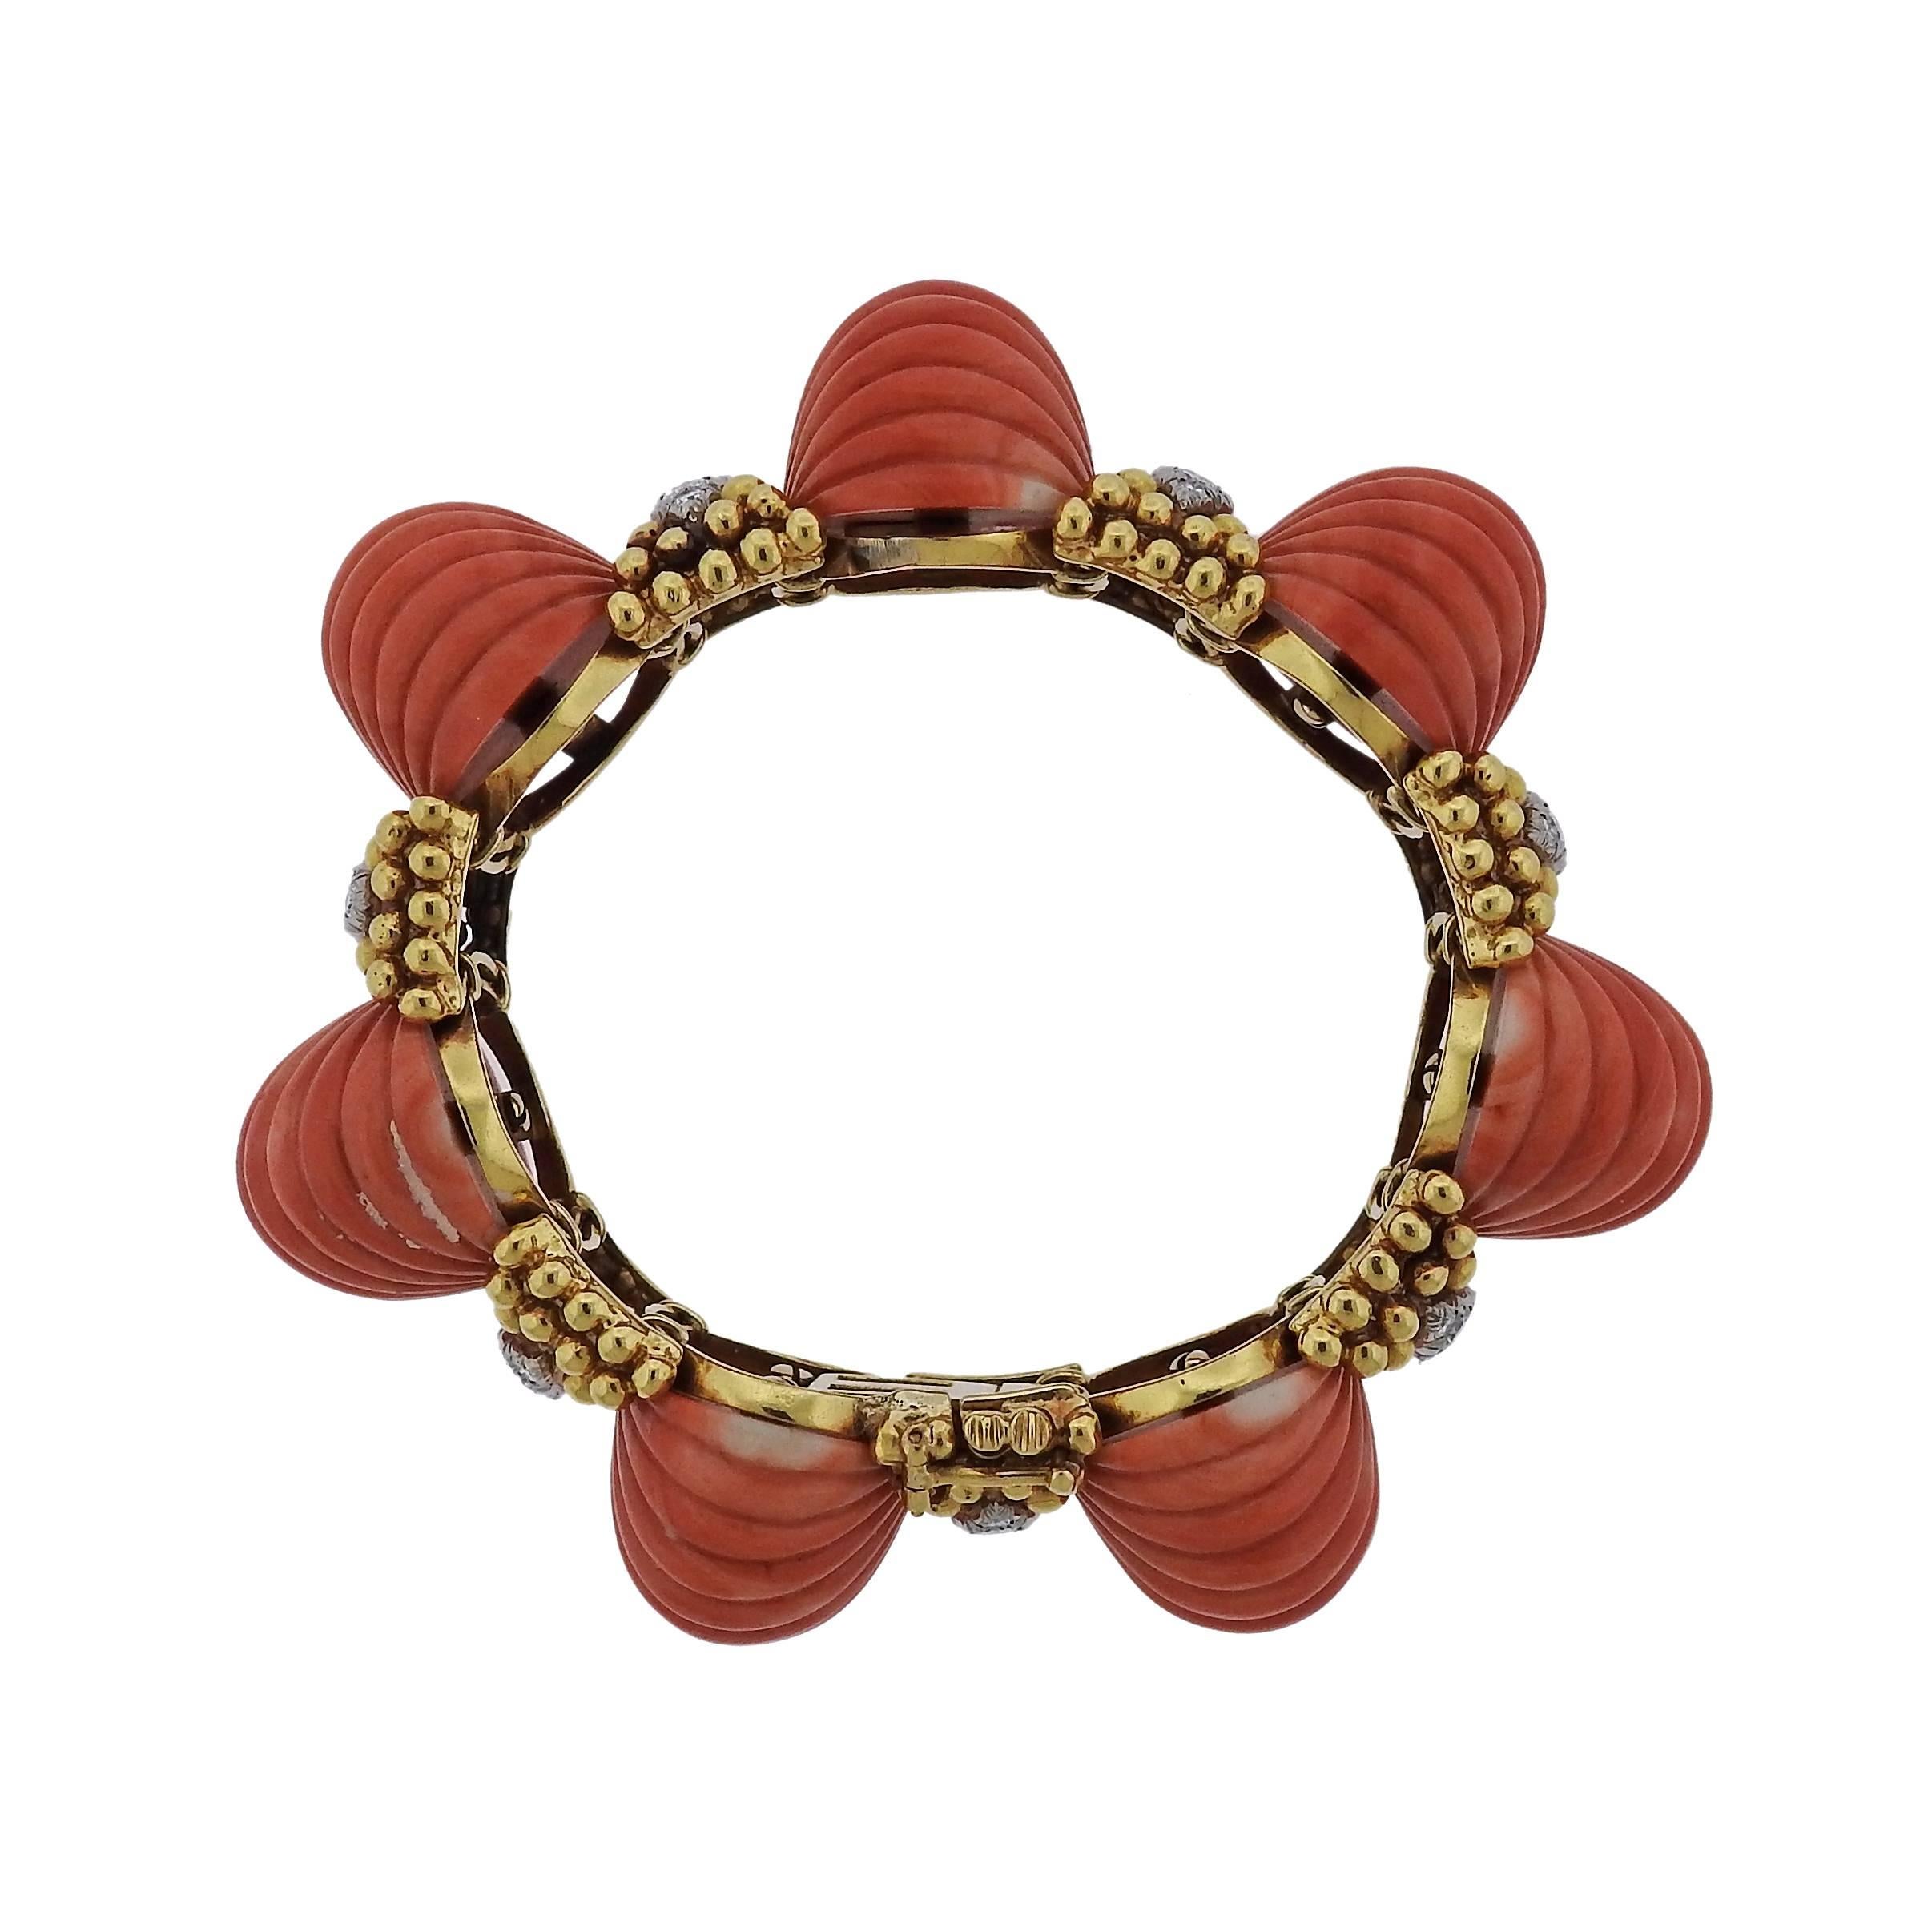 1970s platinum 18k gold carved coral bracelet crafted by David Webb. Features 1.75ctw of H/VS diamonds. Bracelet measures 6 1/2" long and is 23mm wide . Marked David Webb 18k Platinum. Weight is 112.9 grams. 